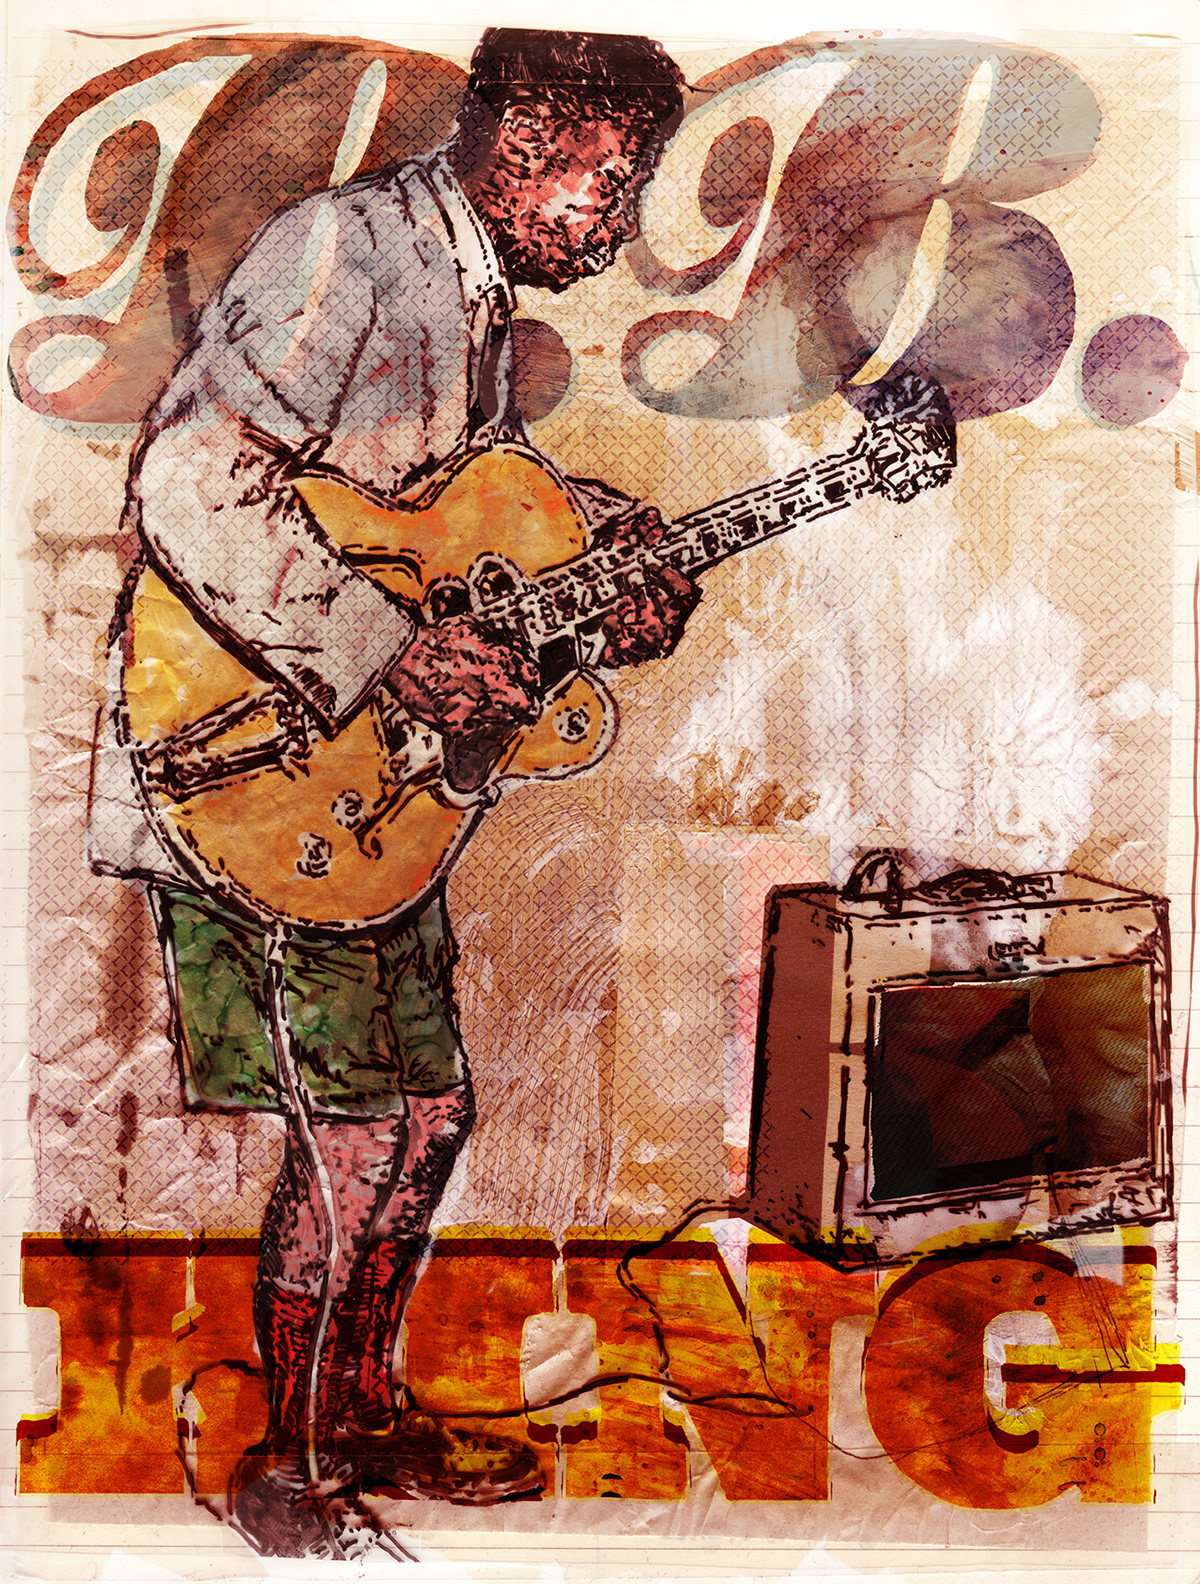 blues musicians artists hand-drawn illustrated collages